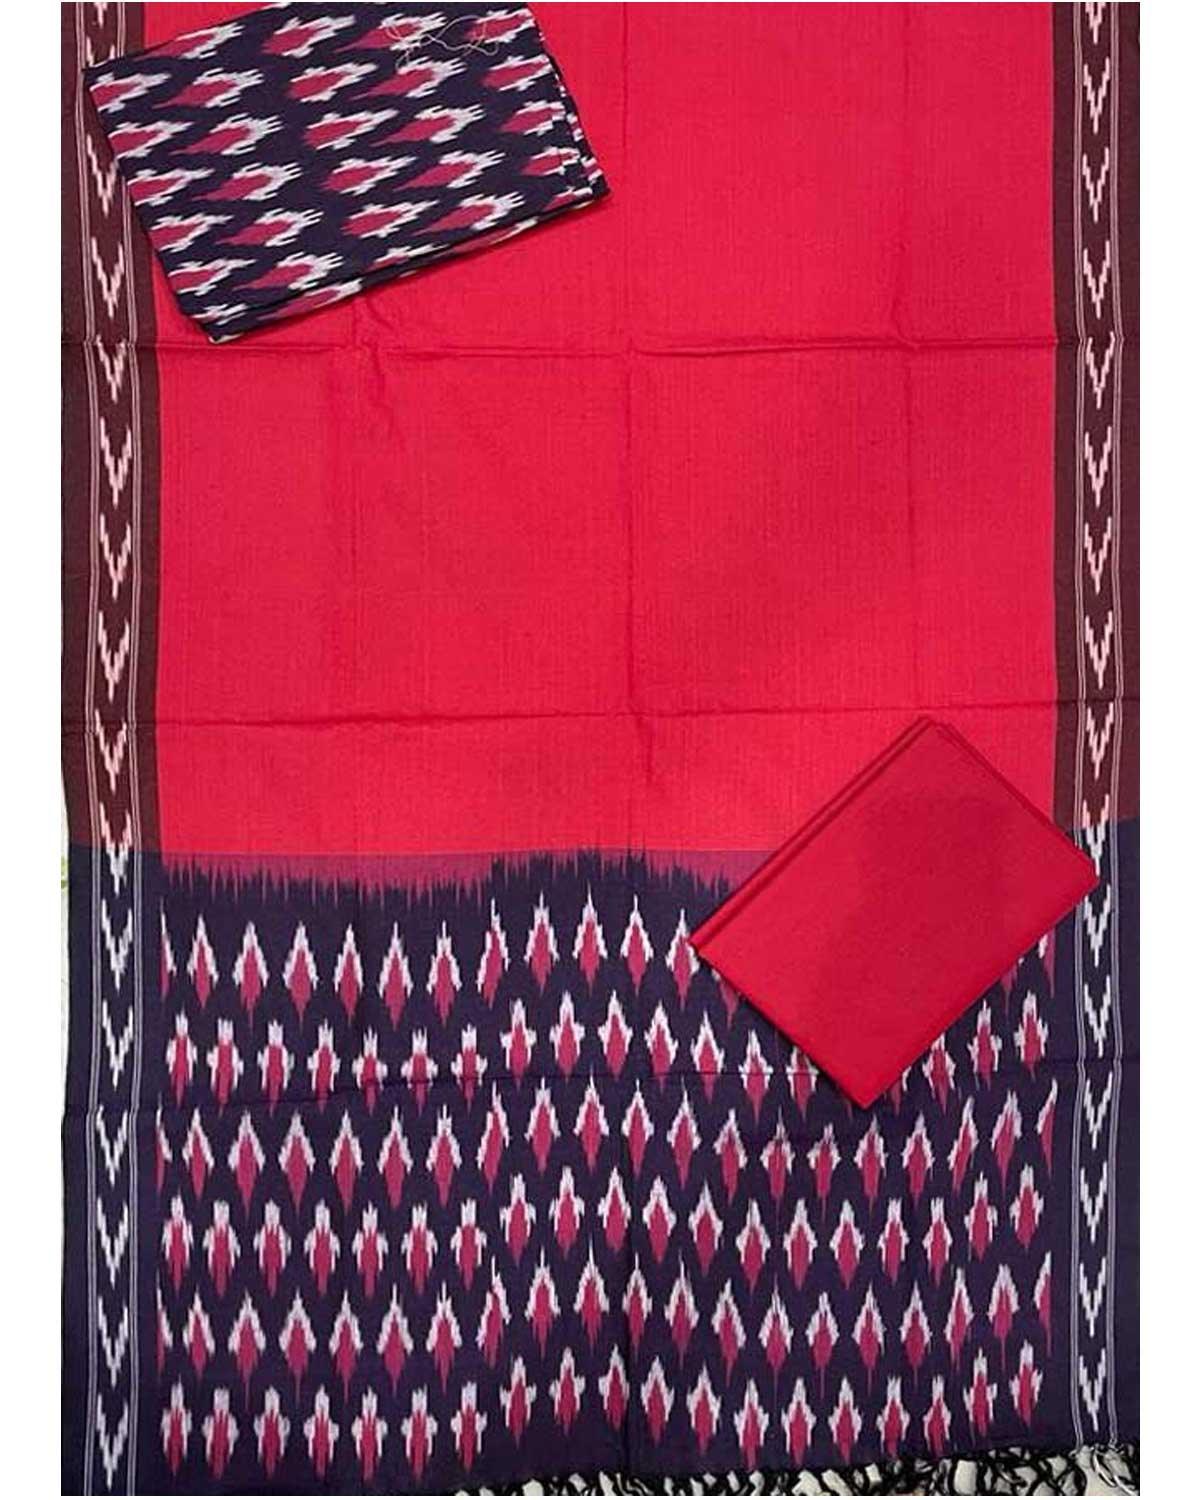 IKKAT COTTON RED WITH BLACK COLOR DRESS MATERIAL - F22 - pochampallysarees.com